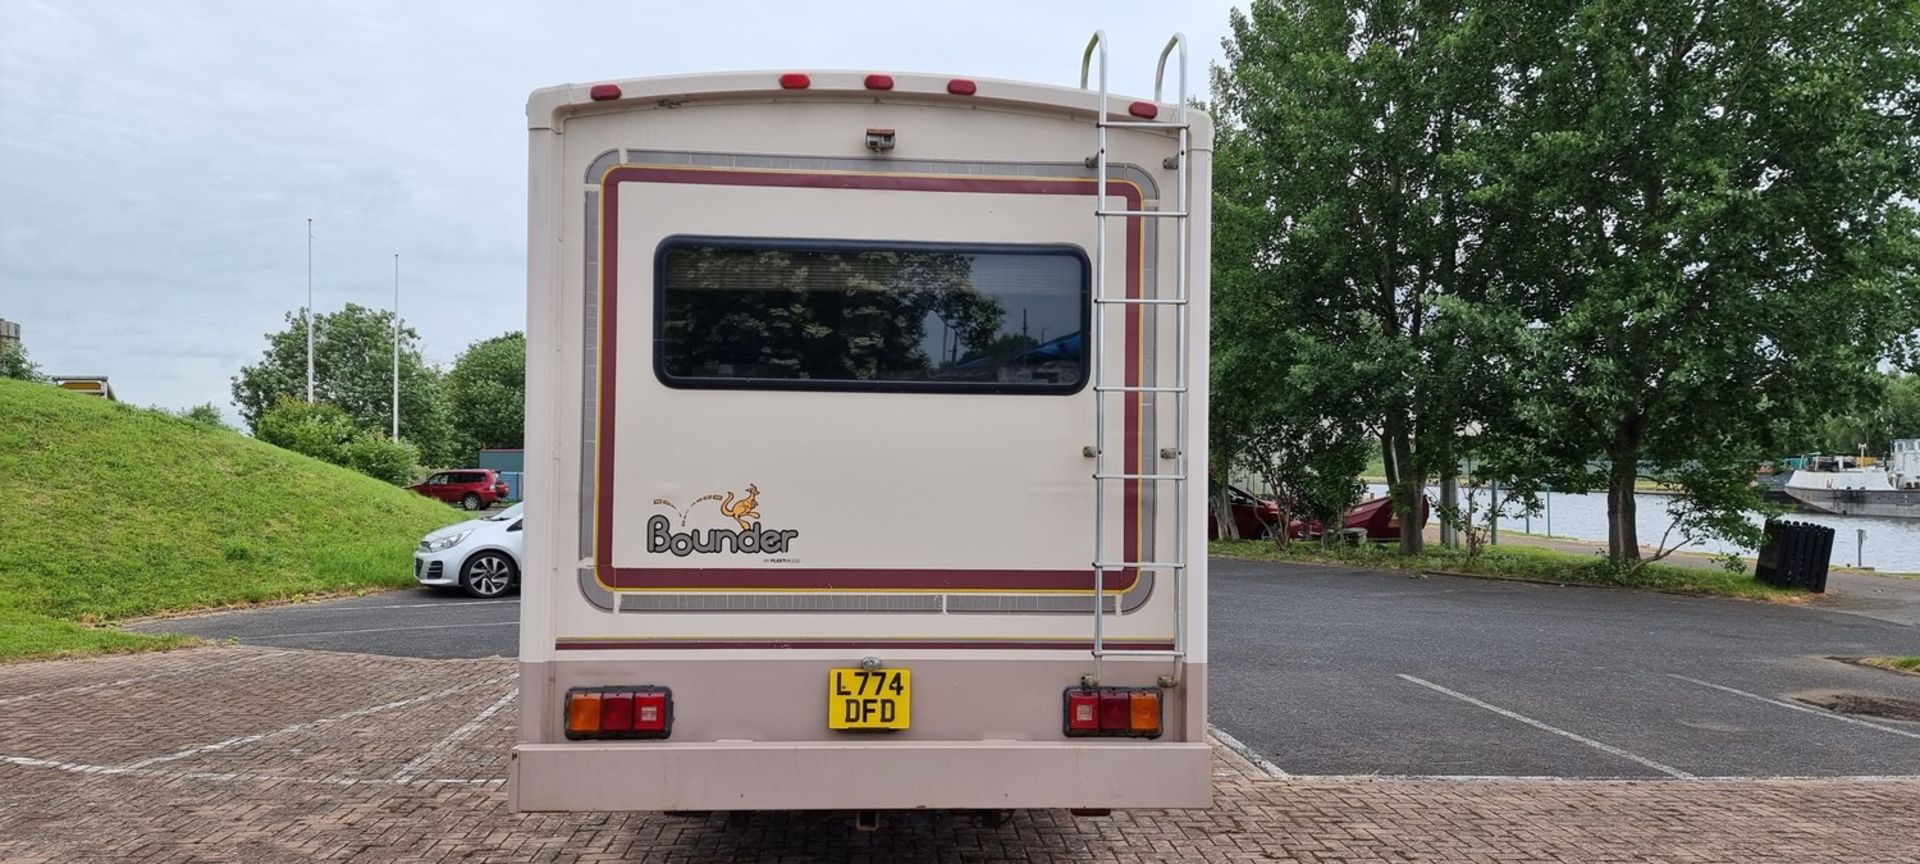 1994 Fleetwood Bounder RV, 7,400cc. Registration number L774 DFD. Chassis number - Image 6 of 11